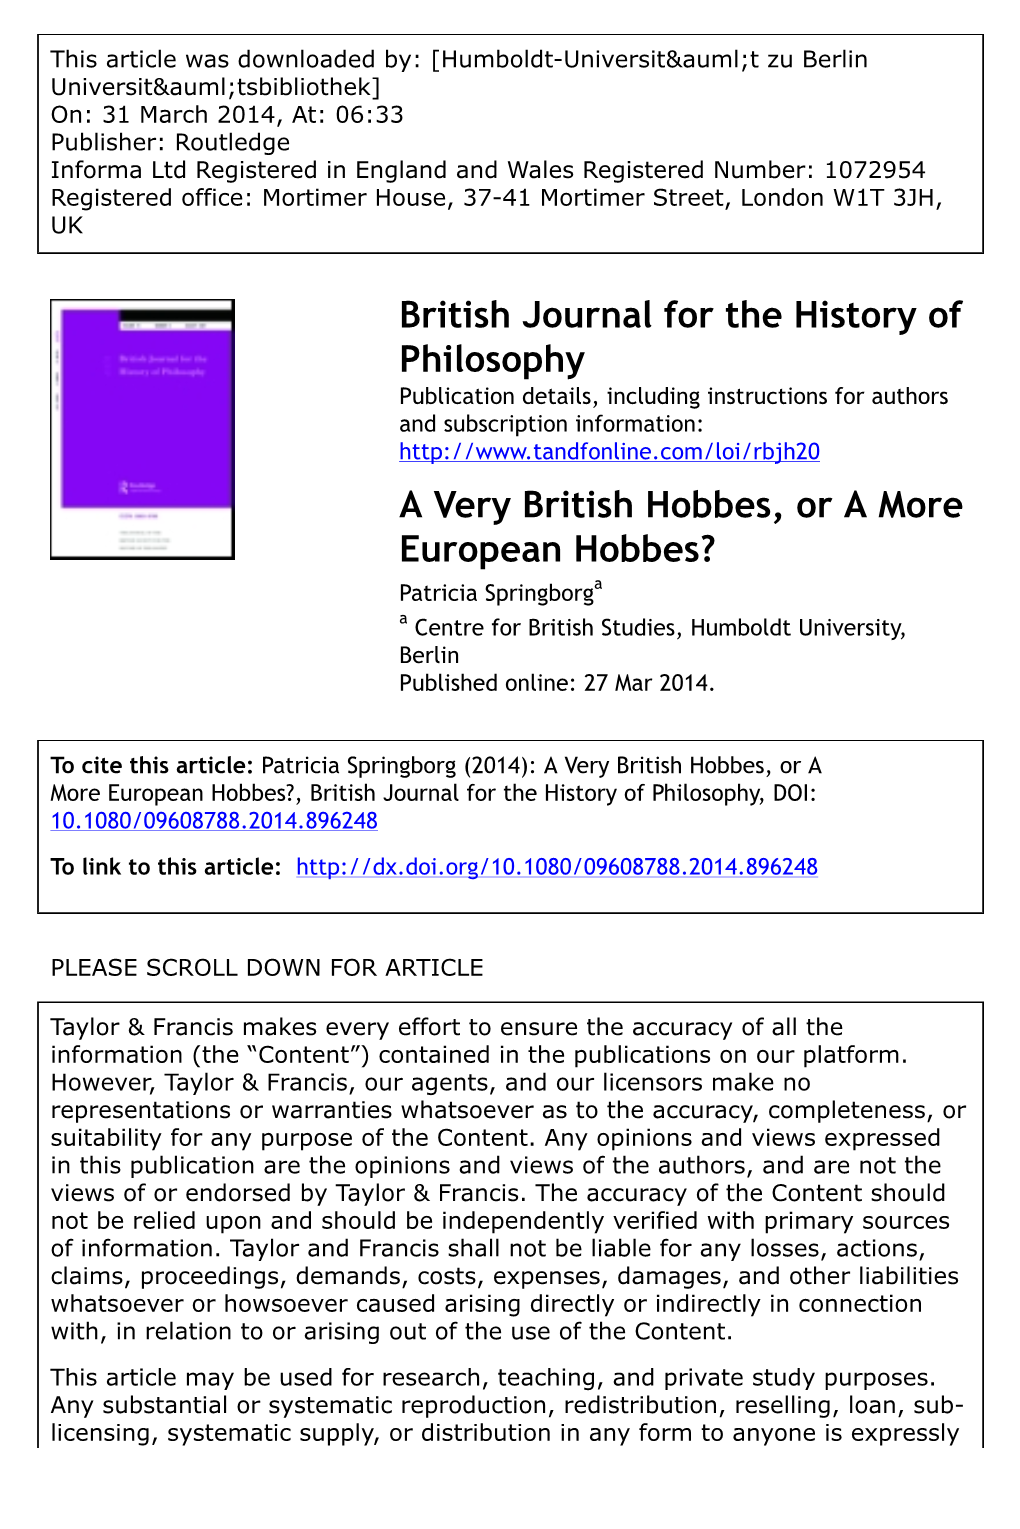 A Very British Hobbes, Or a More European Hobbes? Patricia Springborga a Centre for British Studies, Humboldt University, Berlin Published Online: 27 Mar 2014